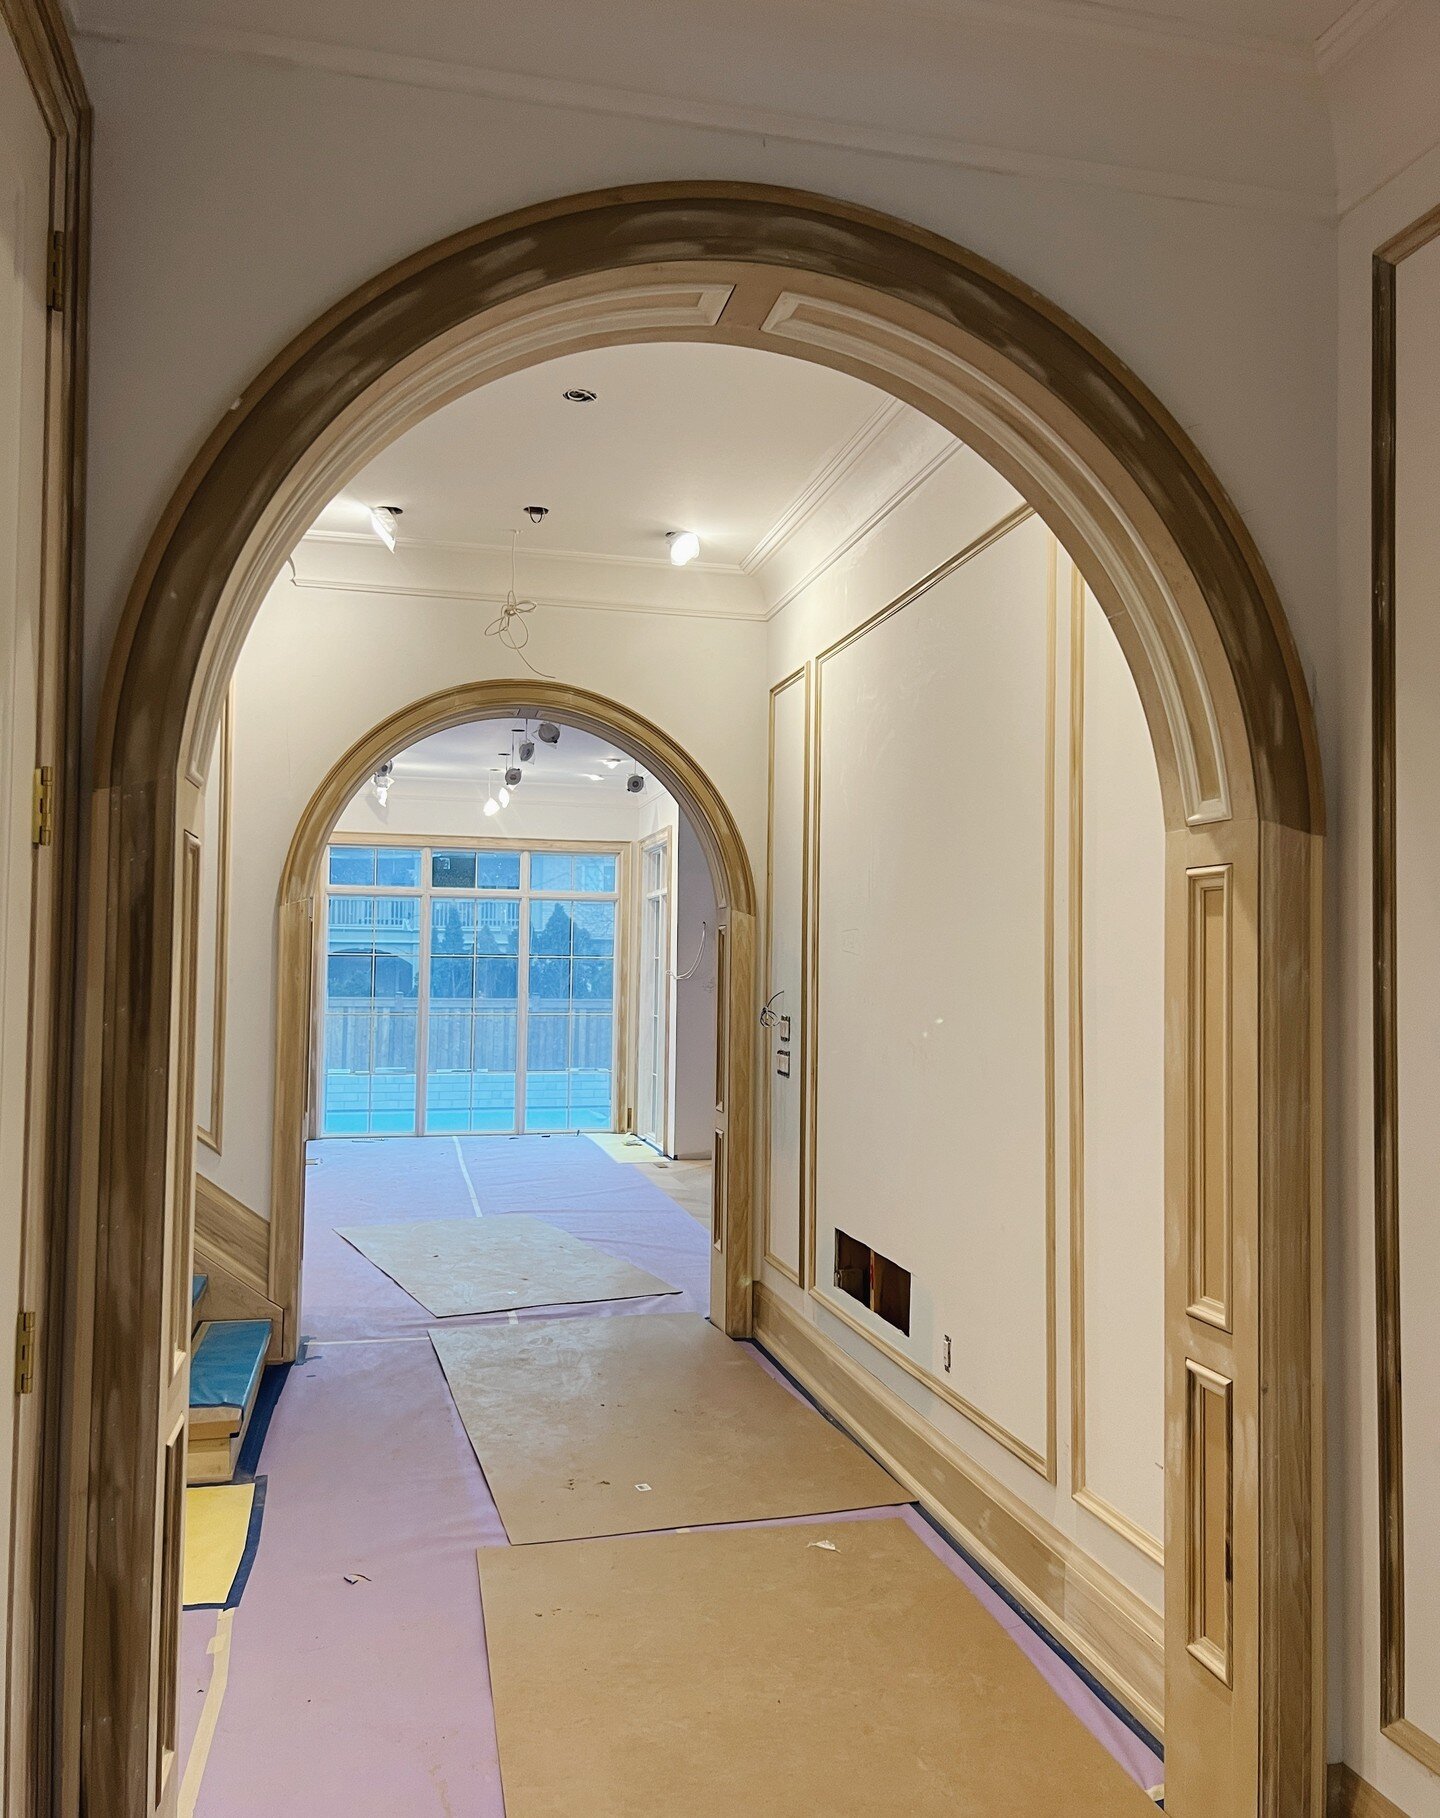 Take a look at the trim work in a recent home. We have curved recessed archways and tall applied mouldings throughout the main floor and staircase. 

#TrimWork #HomeDesign #InteriorDecor